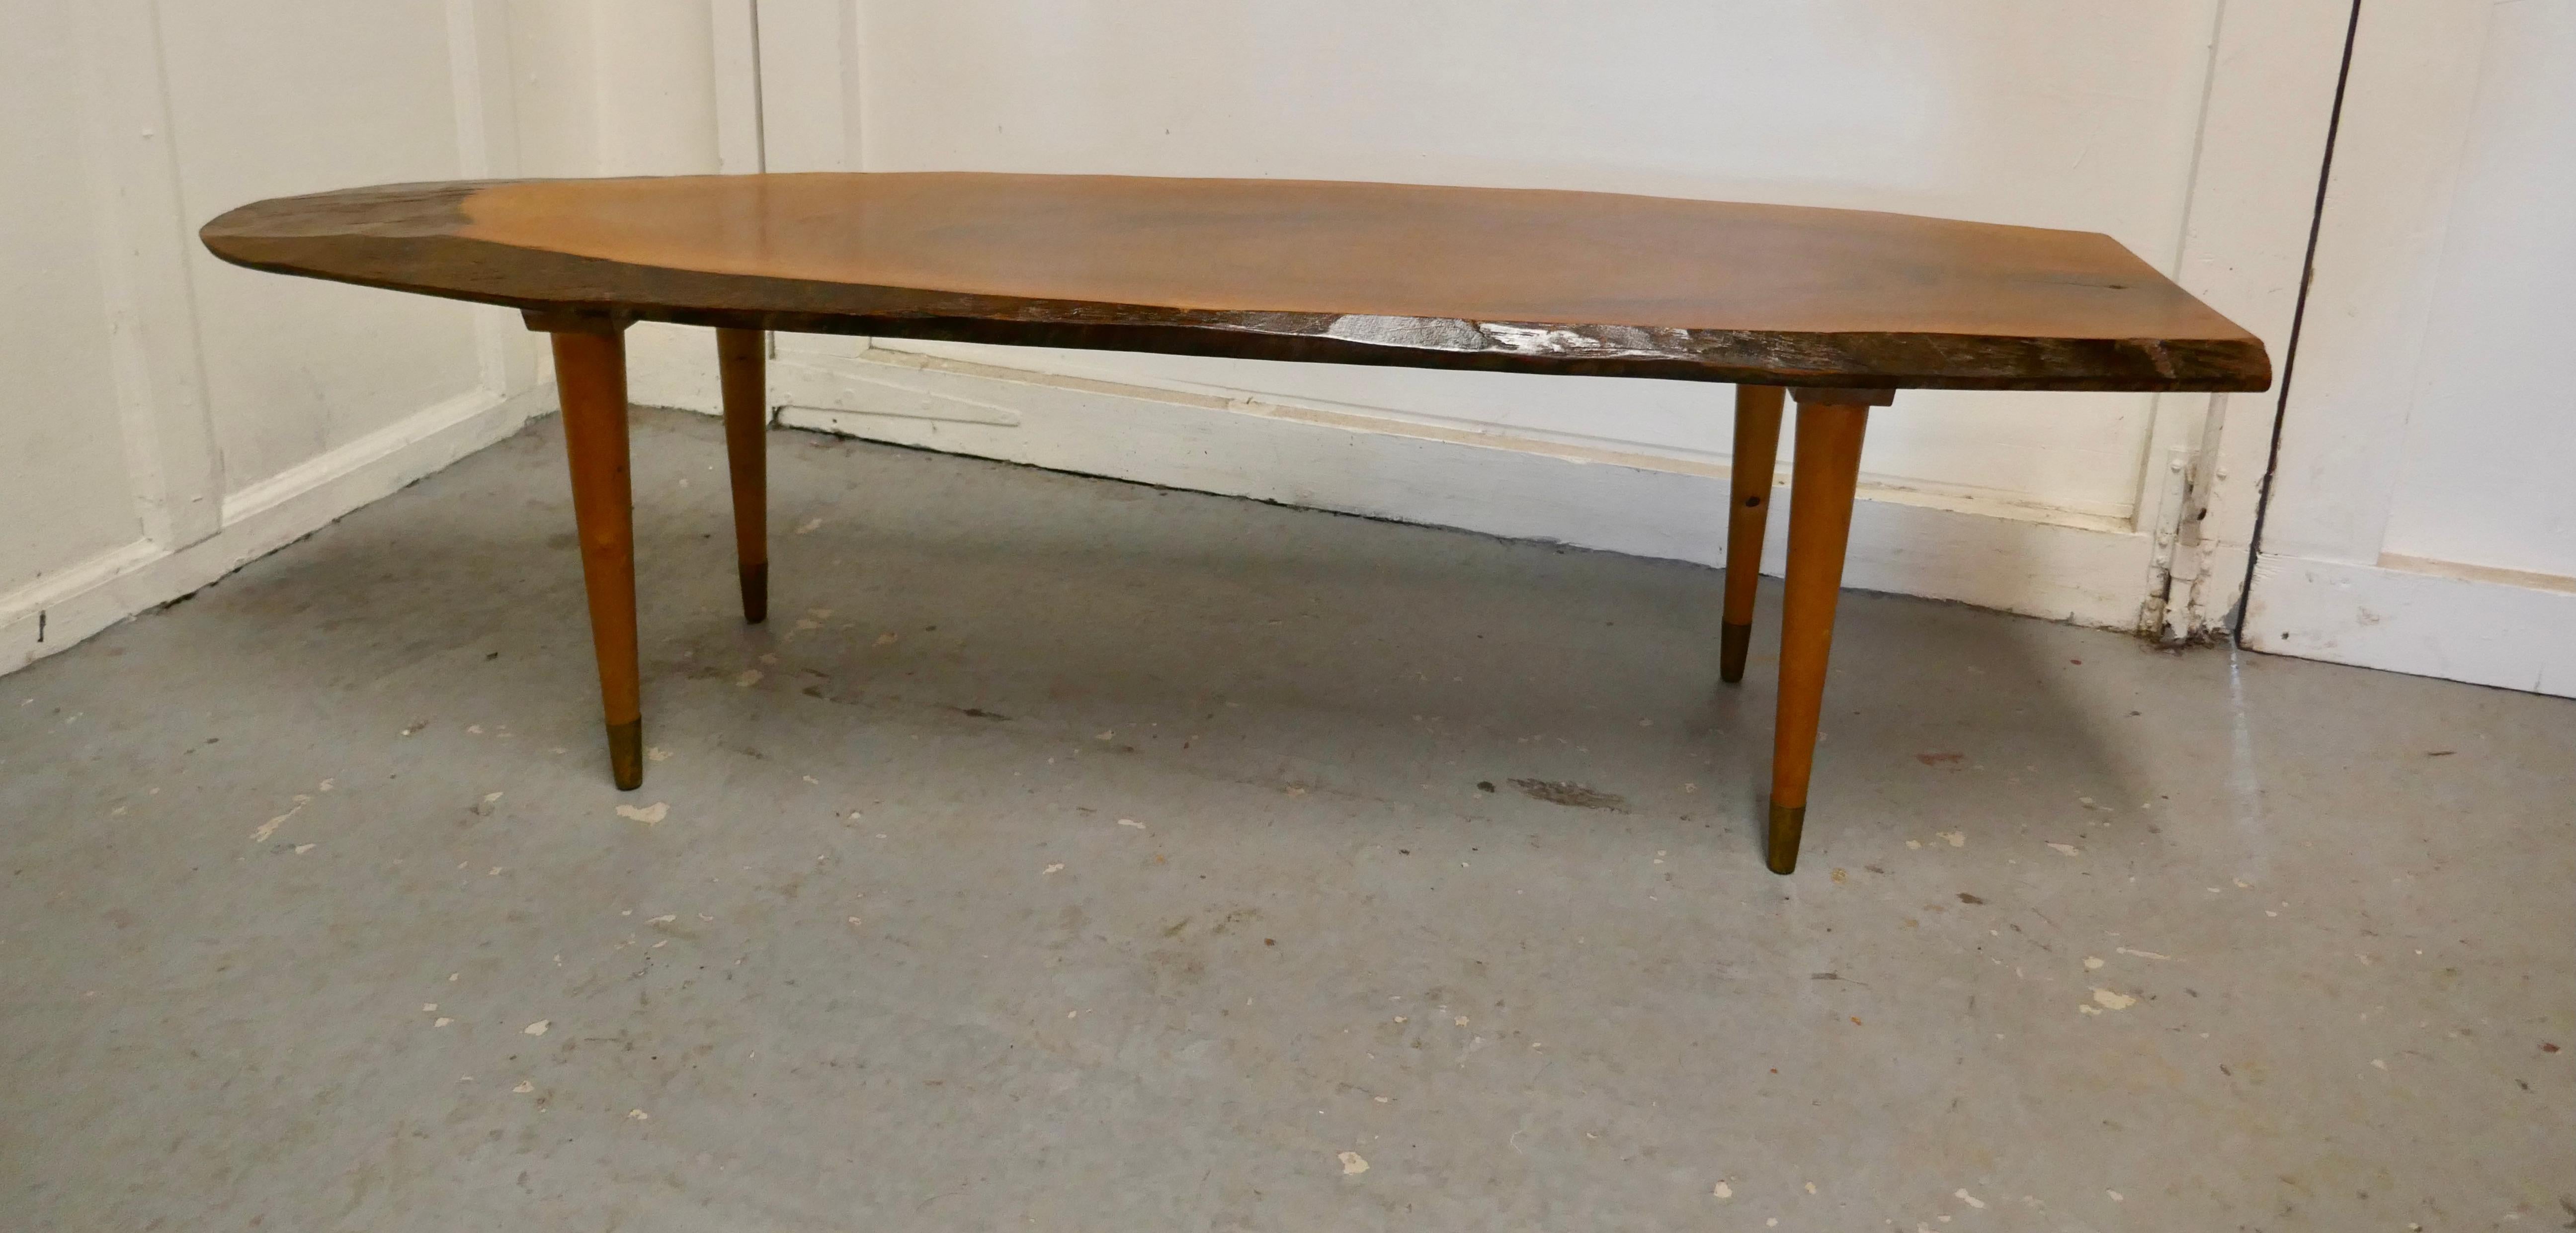 A mid century slice of fruitwood coffee table

This is a magnificent piece, a solid slice cut from the tree with neat tapered beech legs
The table has a rustic designer look and is smooth with a superb patina, even the outer edges are smooth to